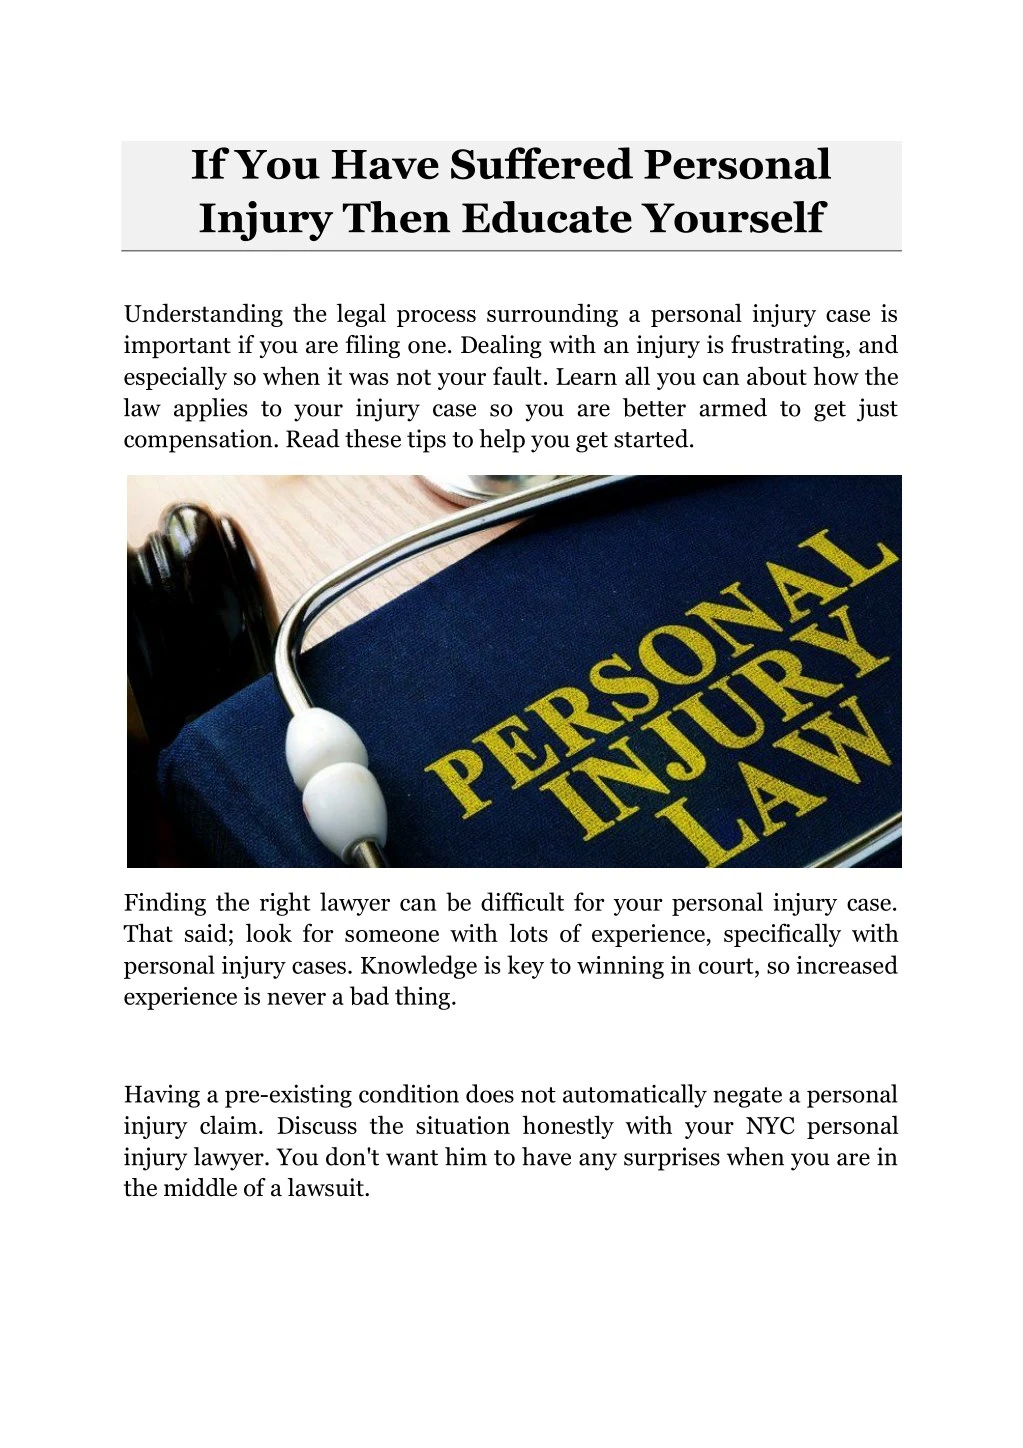 if you have suffered personal injury then educate